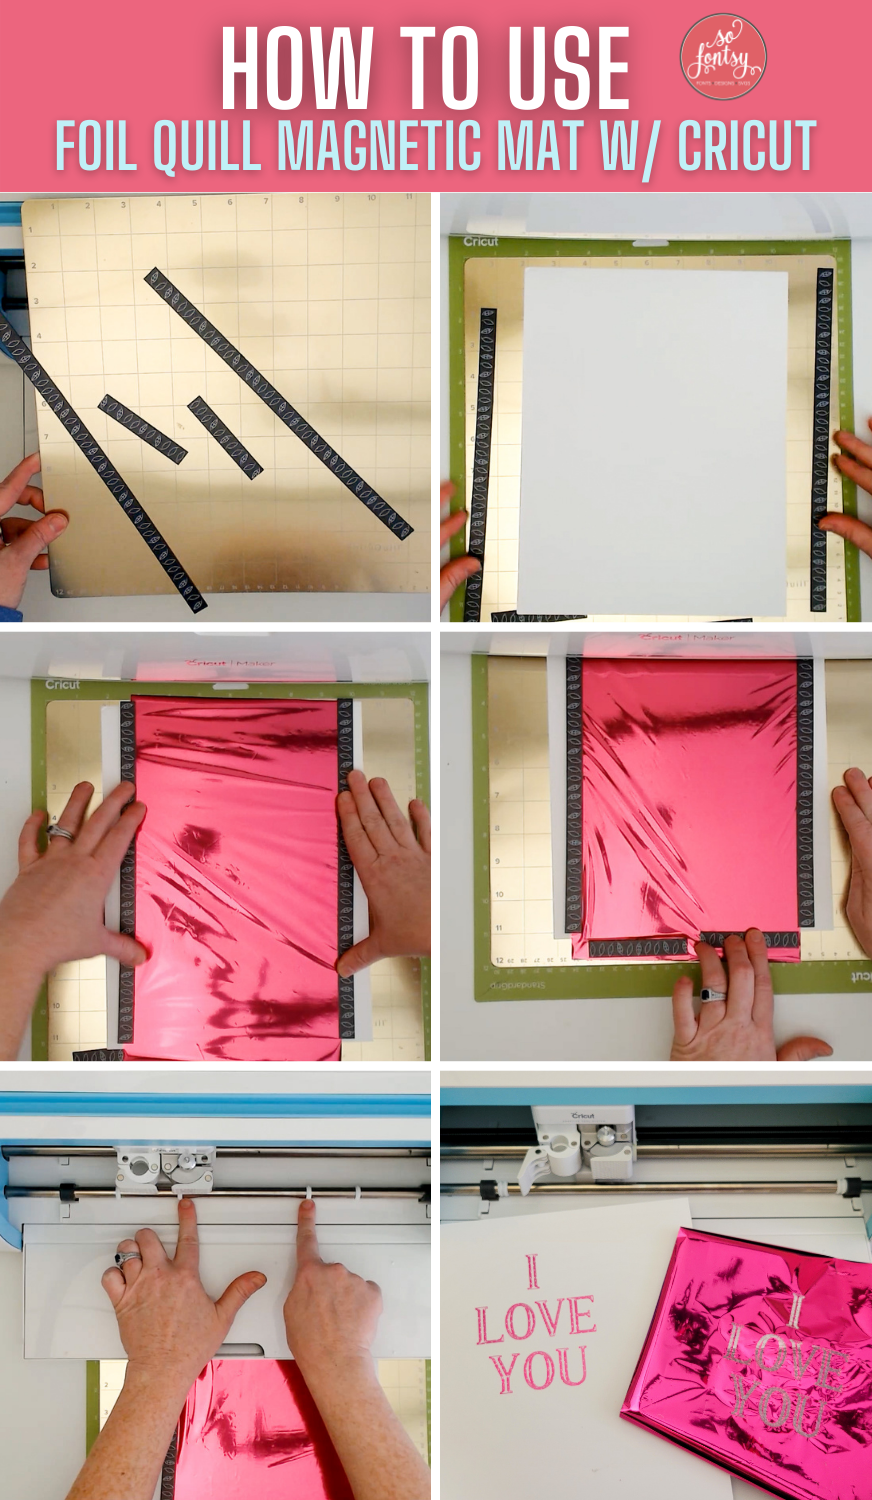 How to Use Foil Quill Magnetic Mat with Cricut